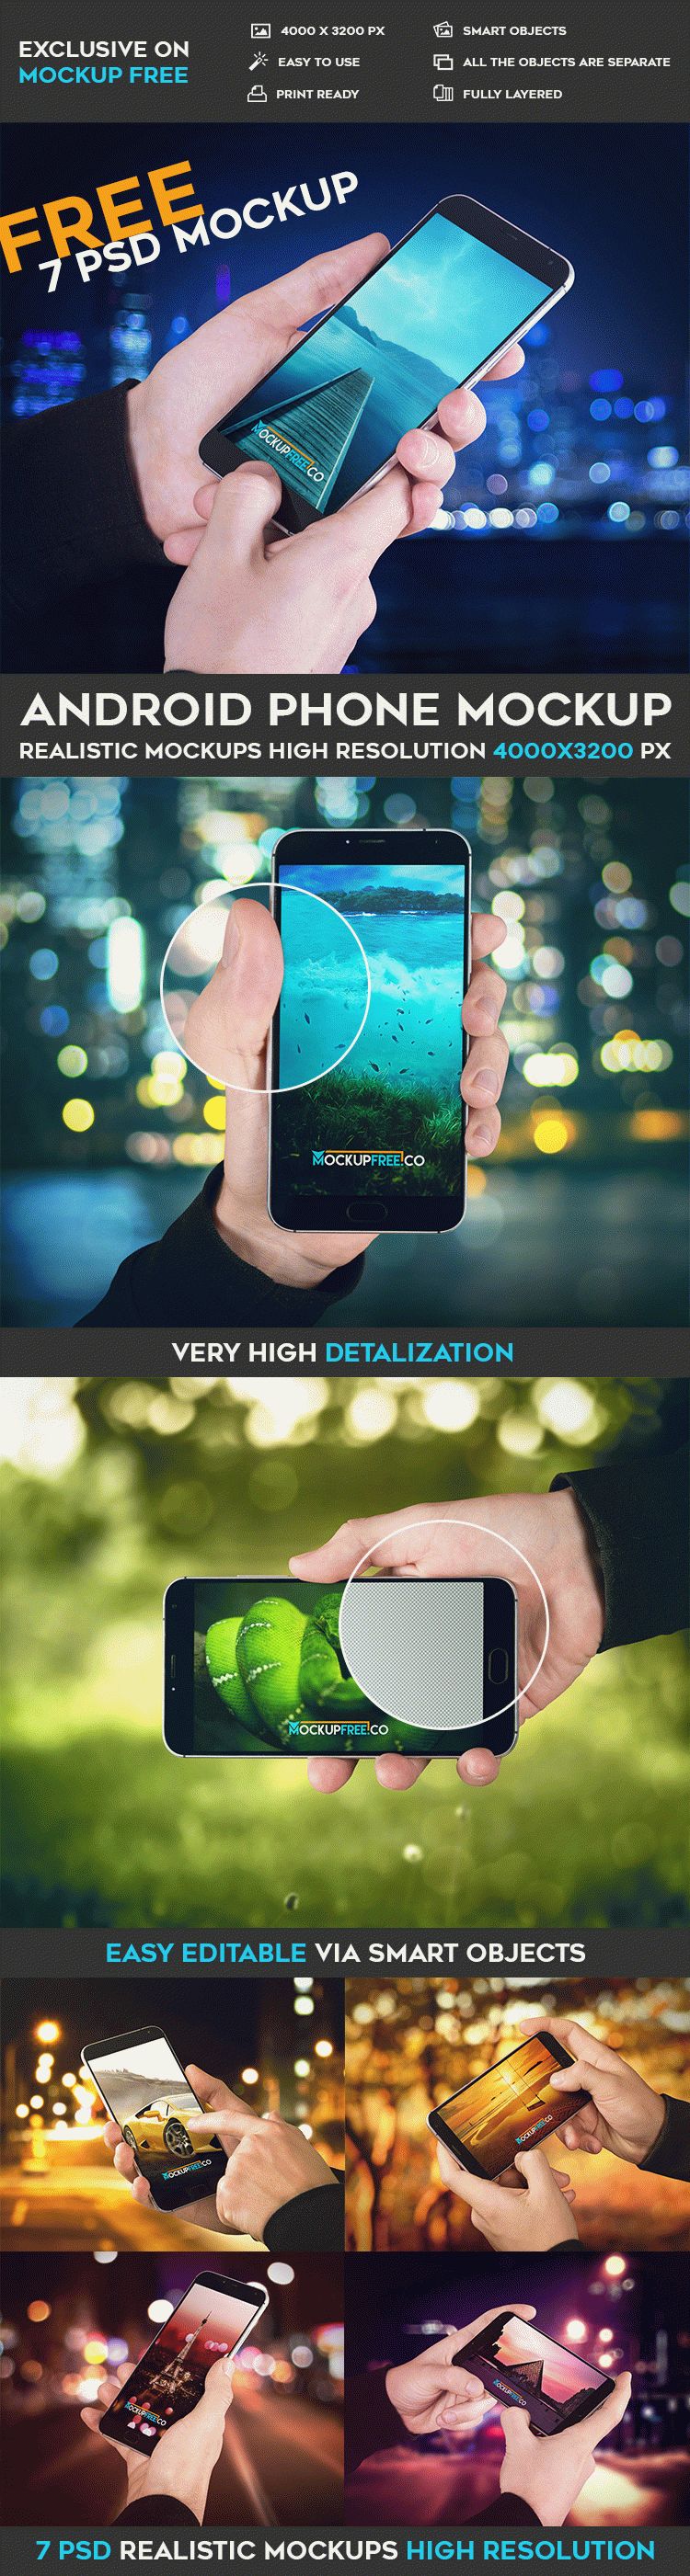 Download Android Phone - 7 Free PSD Mockups | Download PSD Mockup Templates